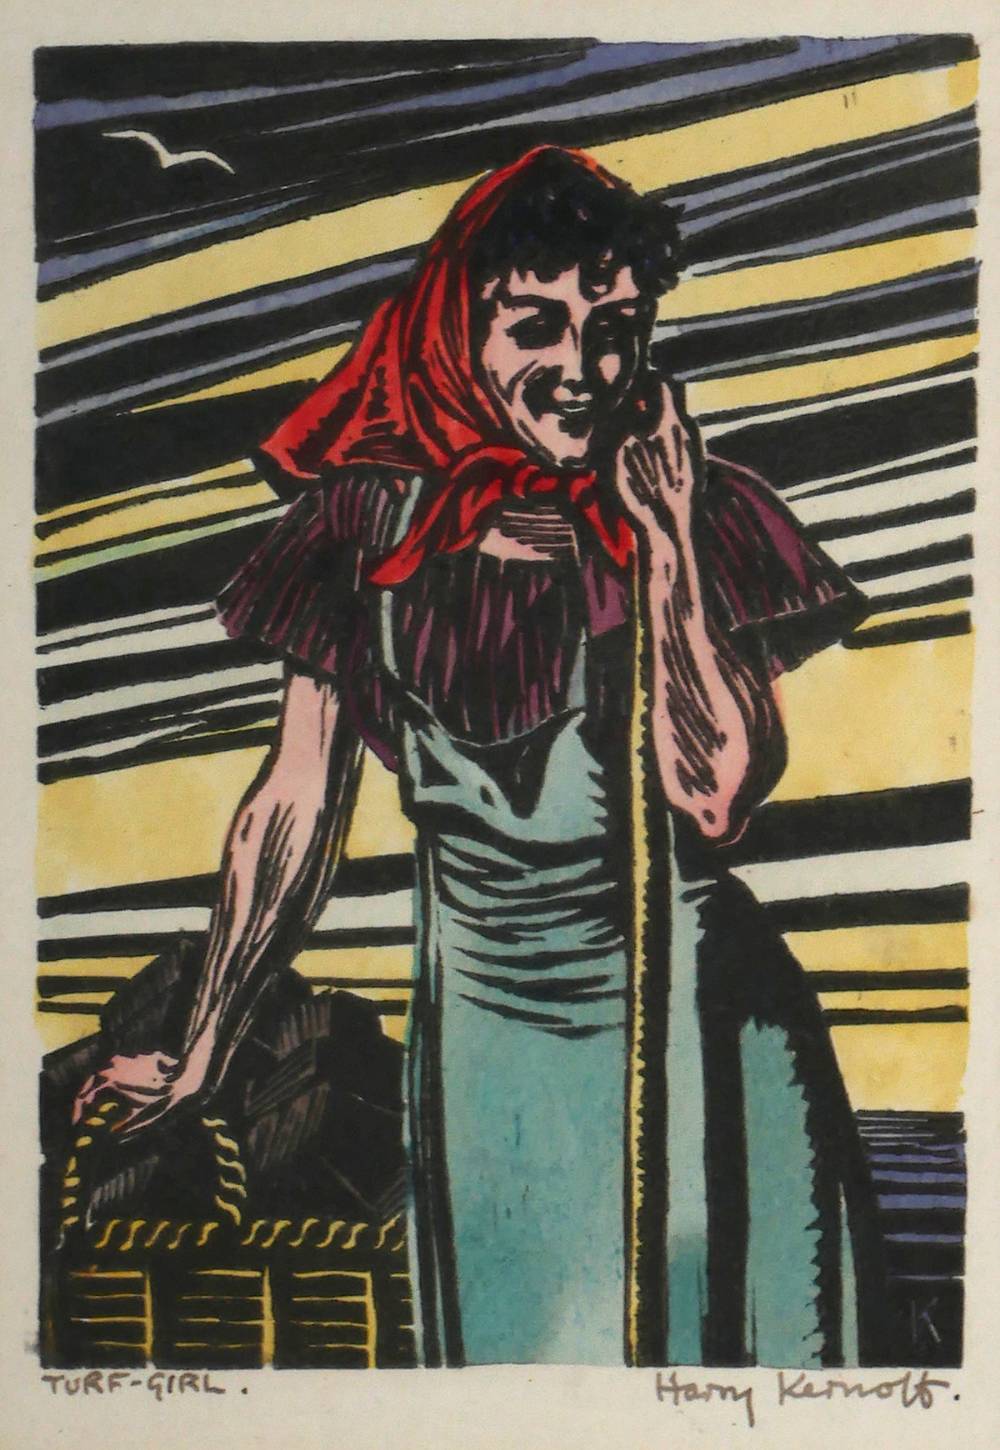 TURF GIRL by Harry Kernoff RHA (1900-1974) at Whyte's Auctions